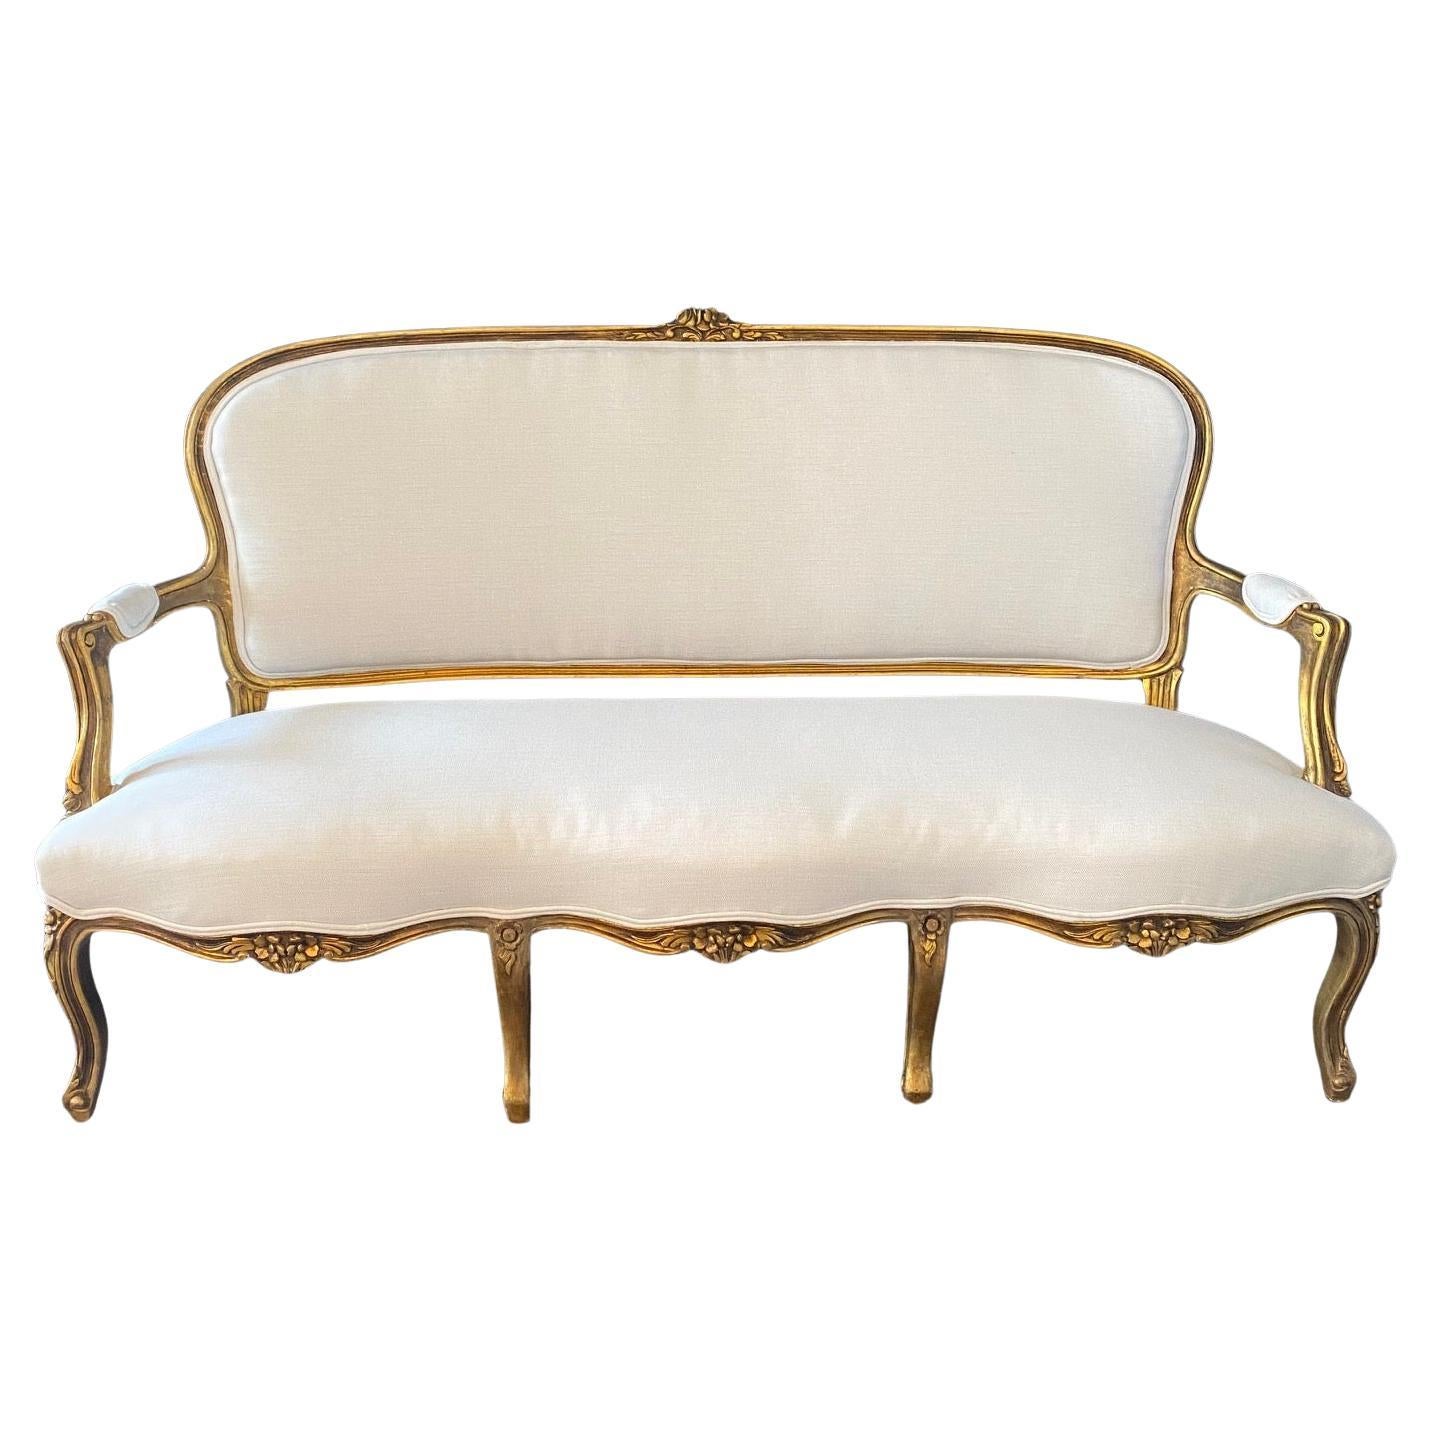 French Gold Giltwood Louis XV Sofa, Loveseat or Settee Newly Reupholstered  For Sale